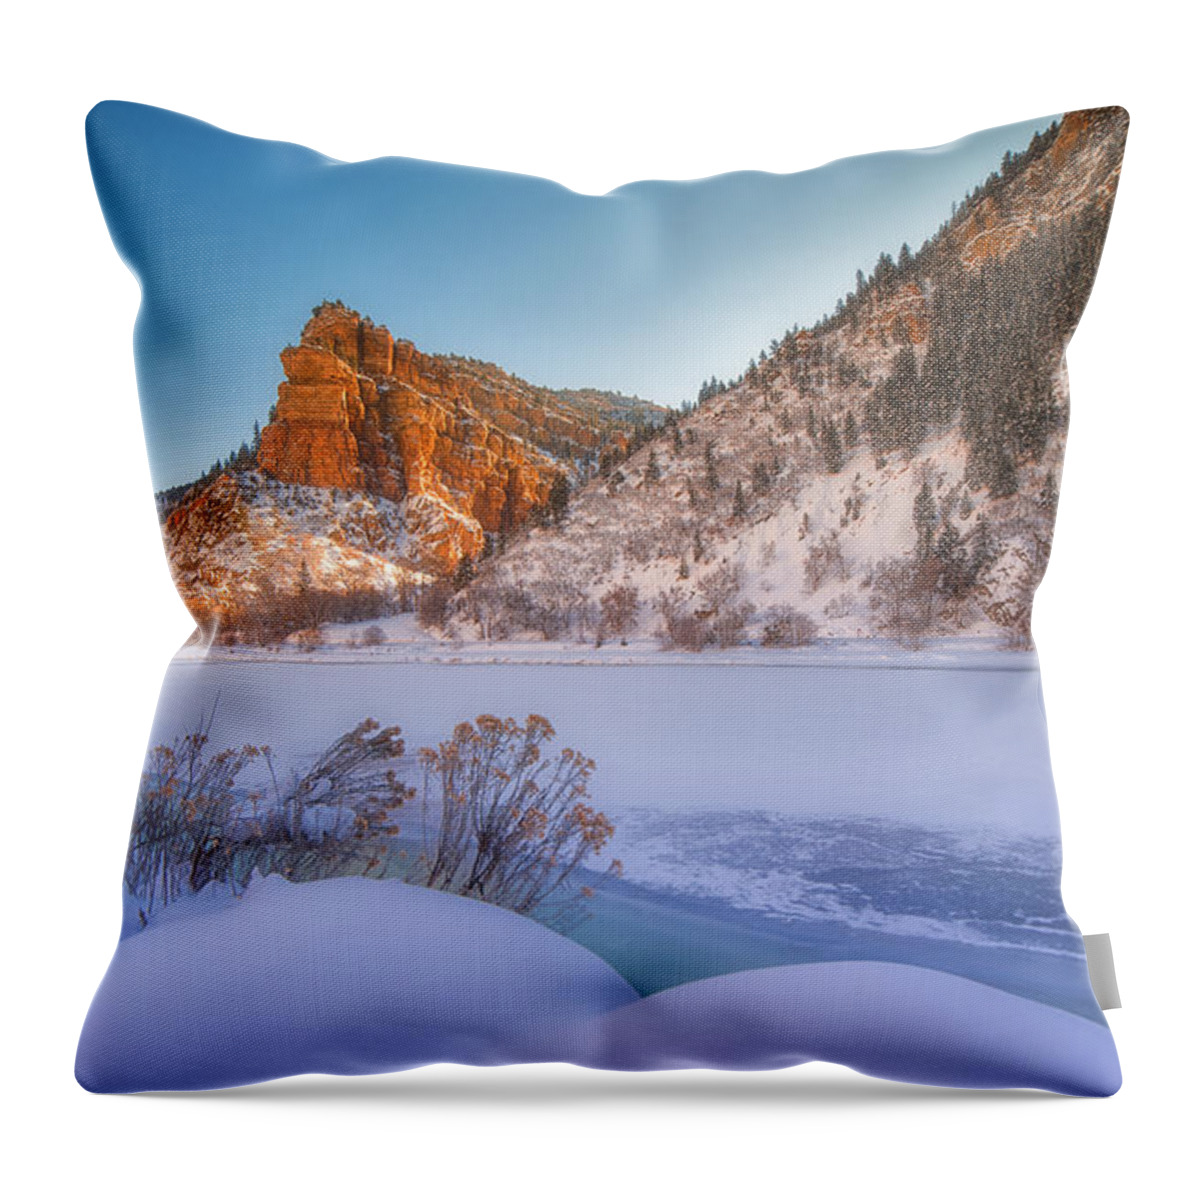 Landscape Throw Pillow featuring the photograph Glenwood Springs Morning by Darren White